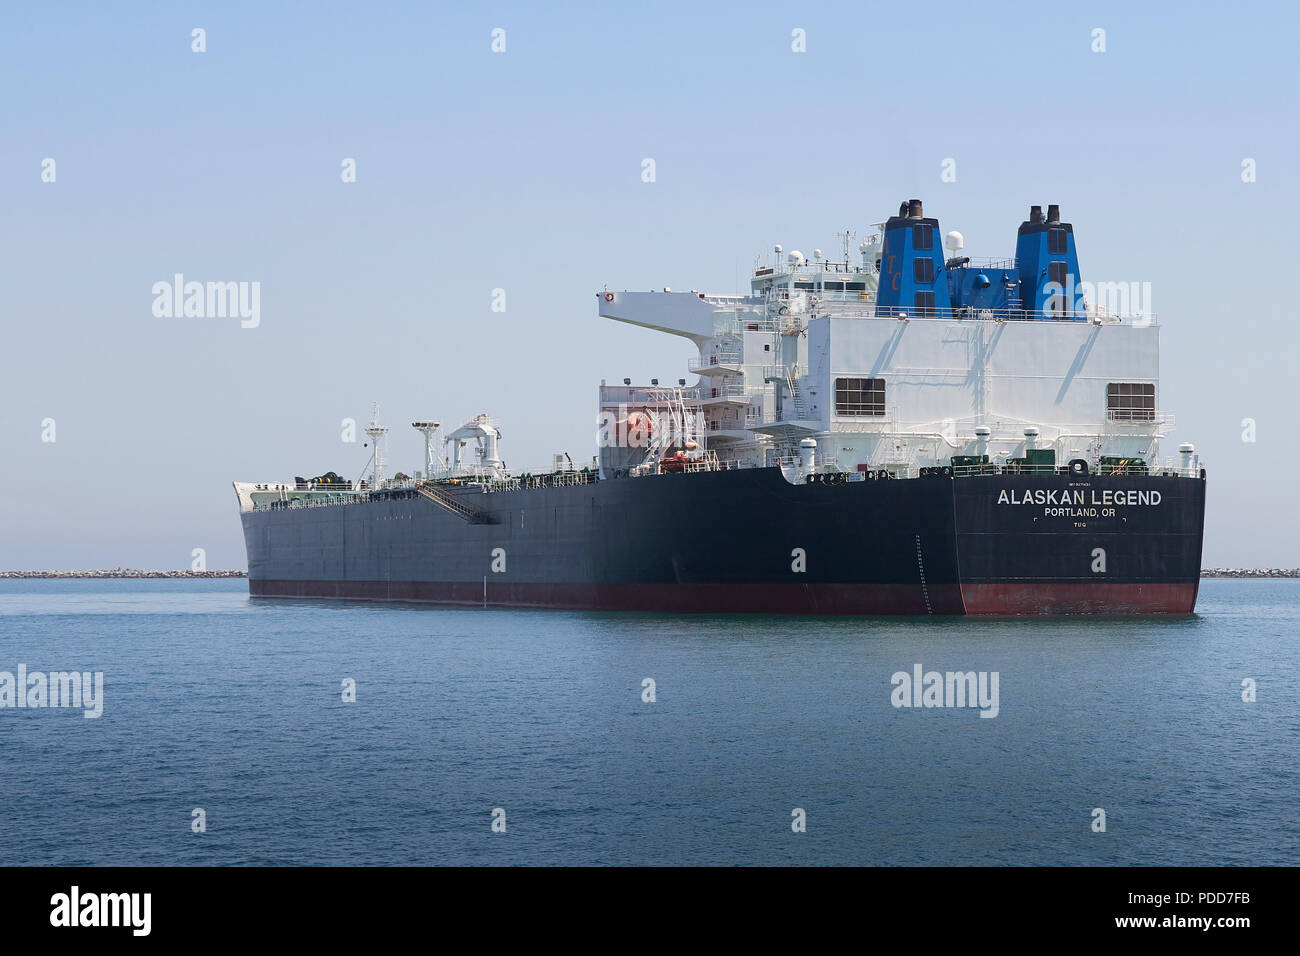 Rear View Of The Giant Supertanker (Crude Oil Tanker), ALASKAN LEGEND, At Anchor In The Port Of Long Beach, California, USA. Stock Photo